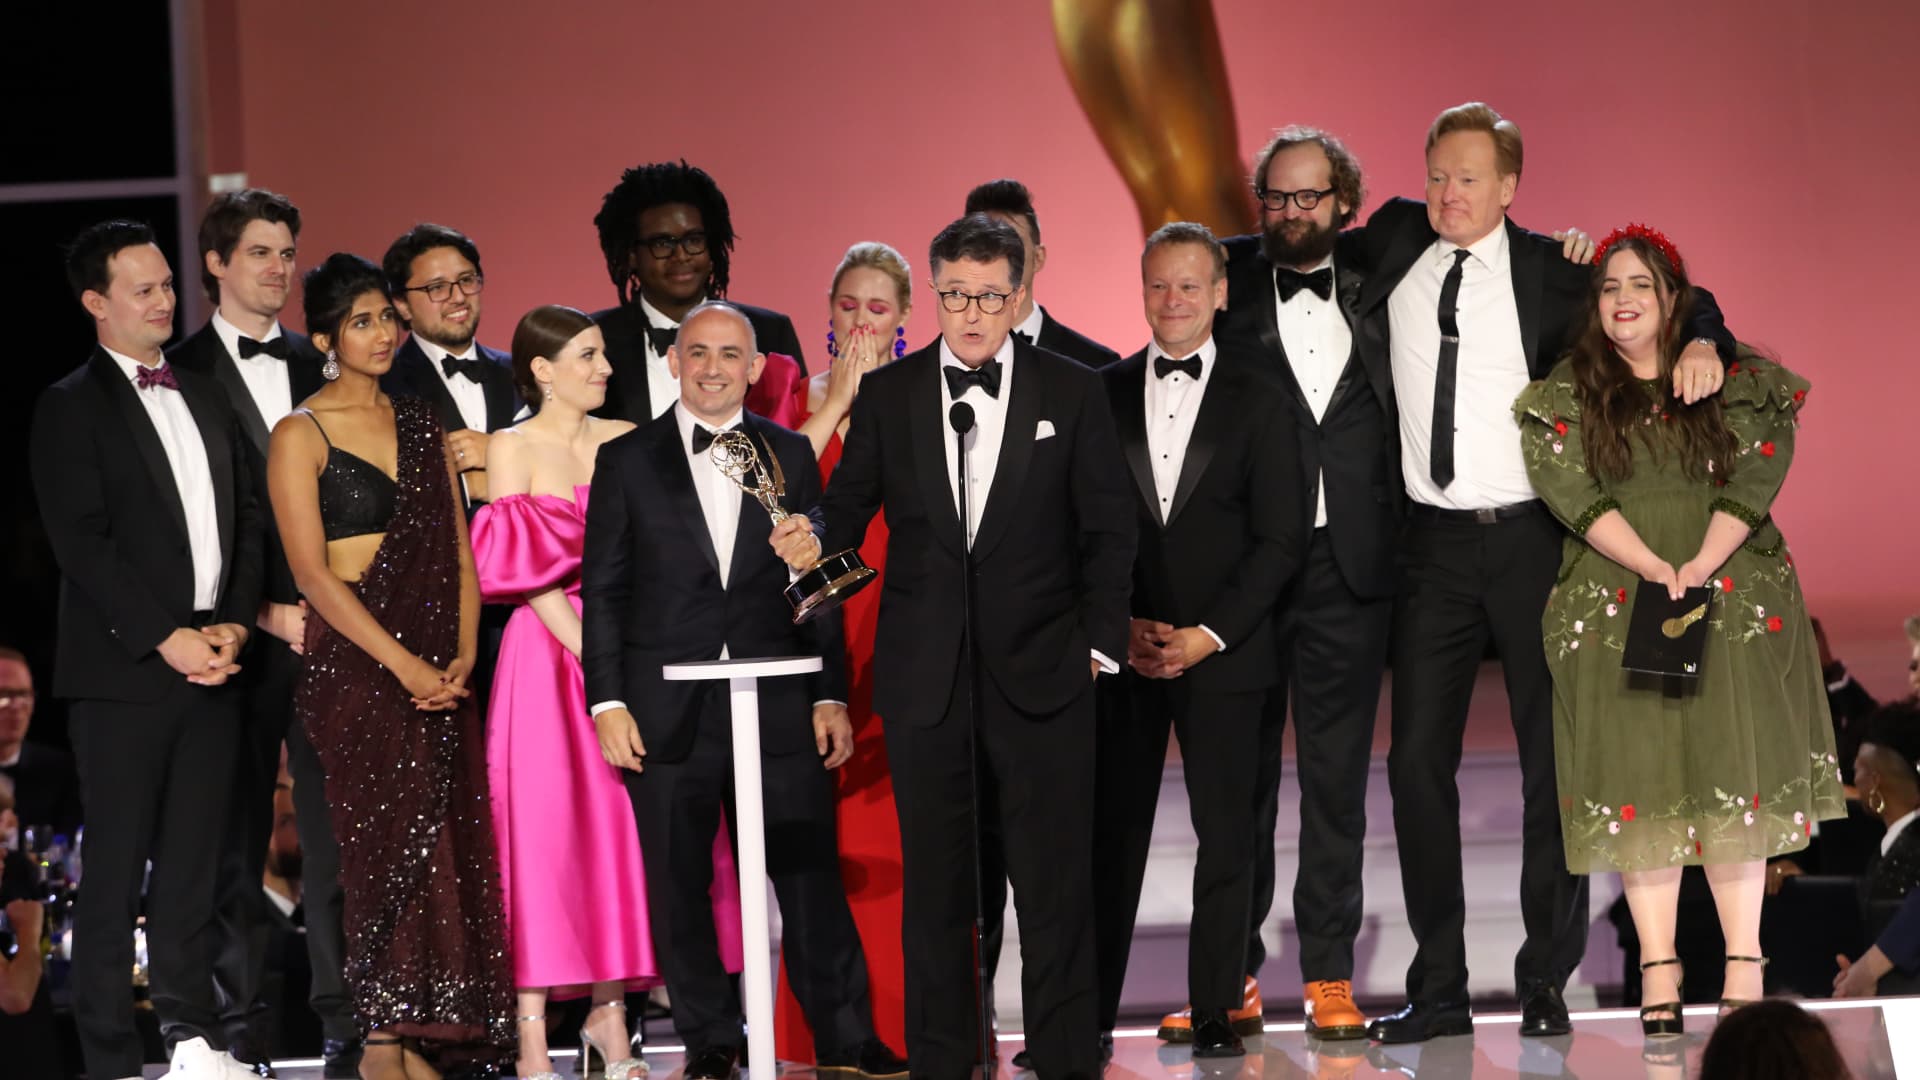 Stephen Colbert and the writers of The Late Show with Stephen Colbert appears at the 73RD EMMY AWARDS, broadcast Sunday, Sept. 19.